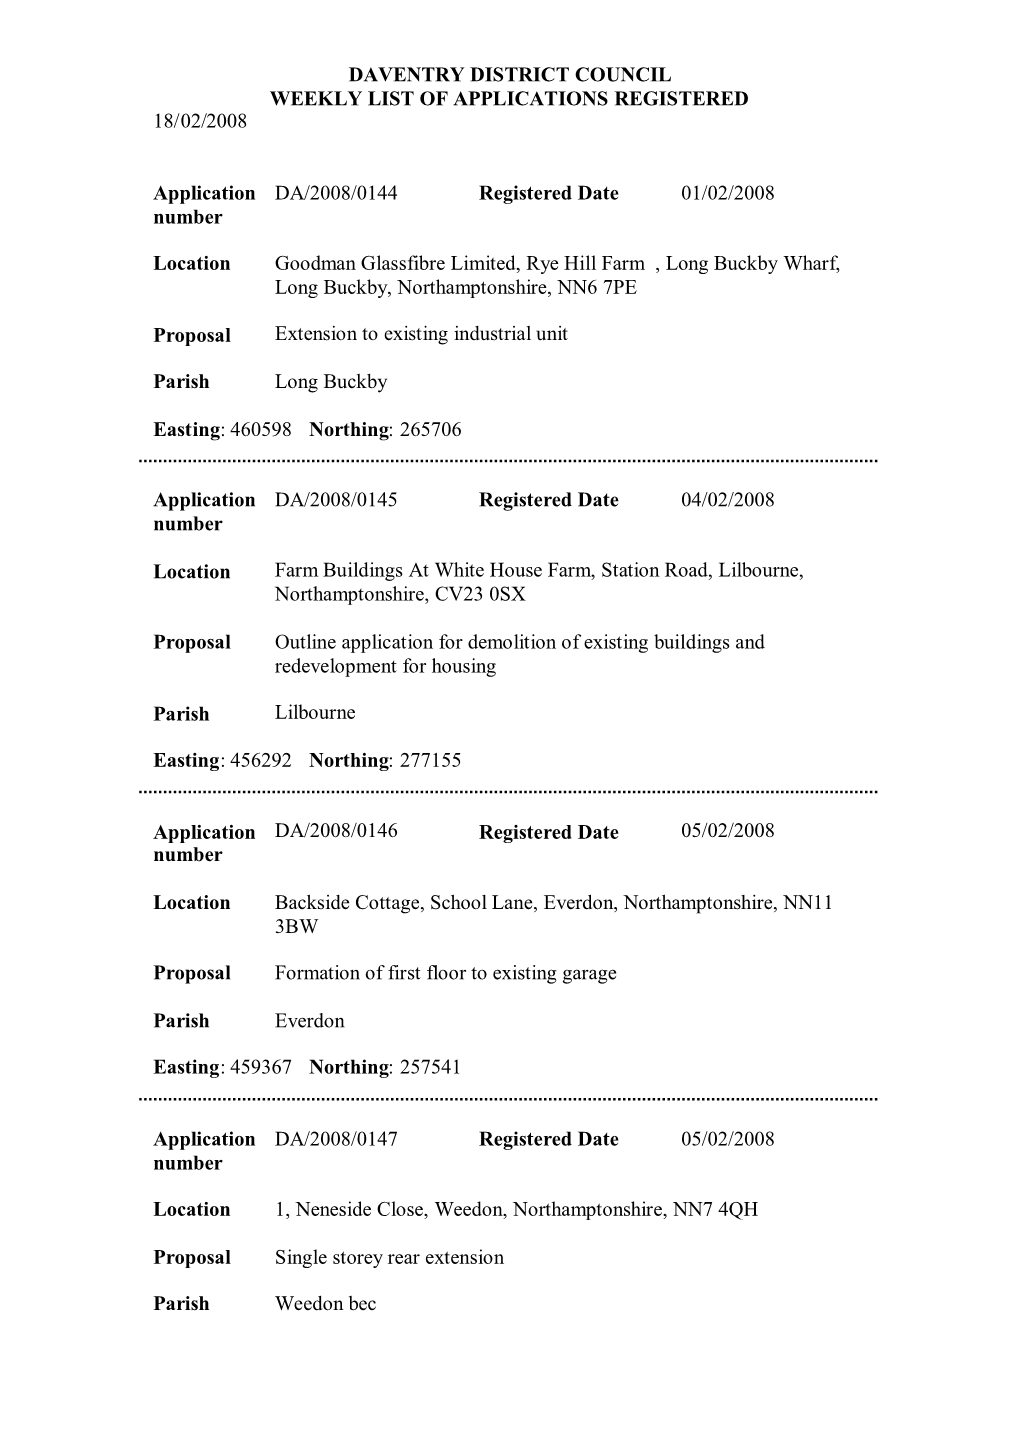 Daventry District Council Weekly List of Applications Registered 18/02/2008